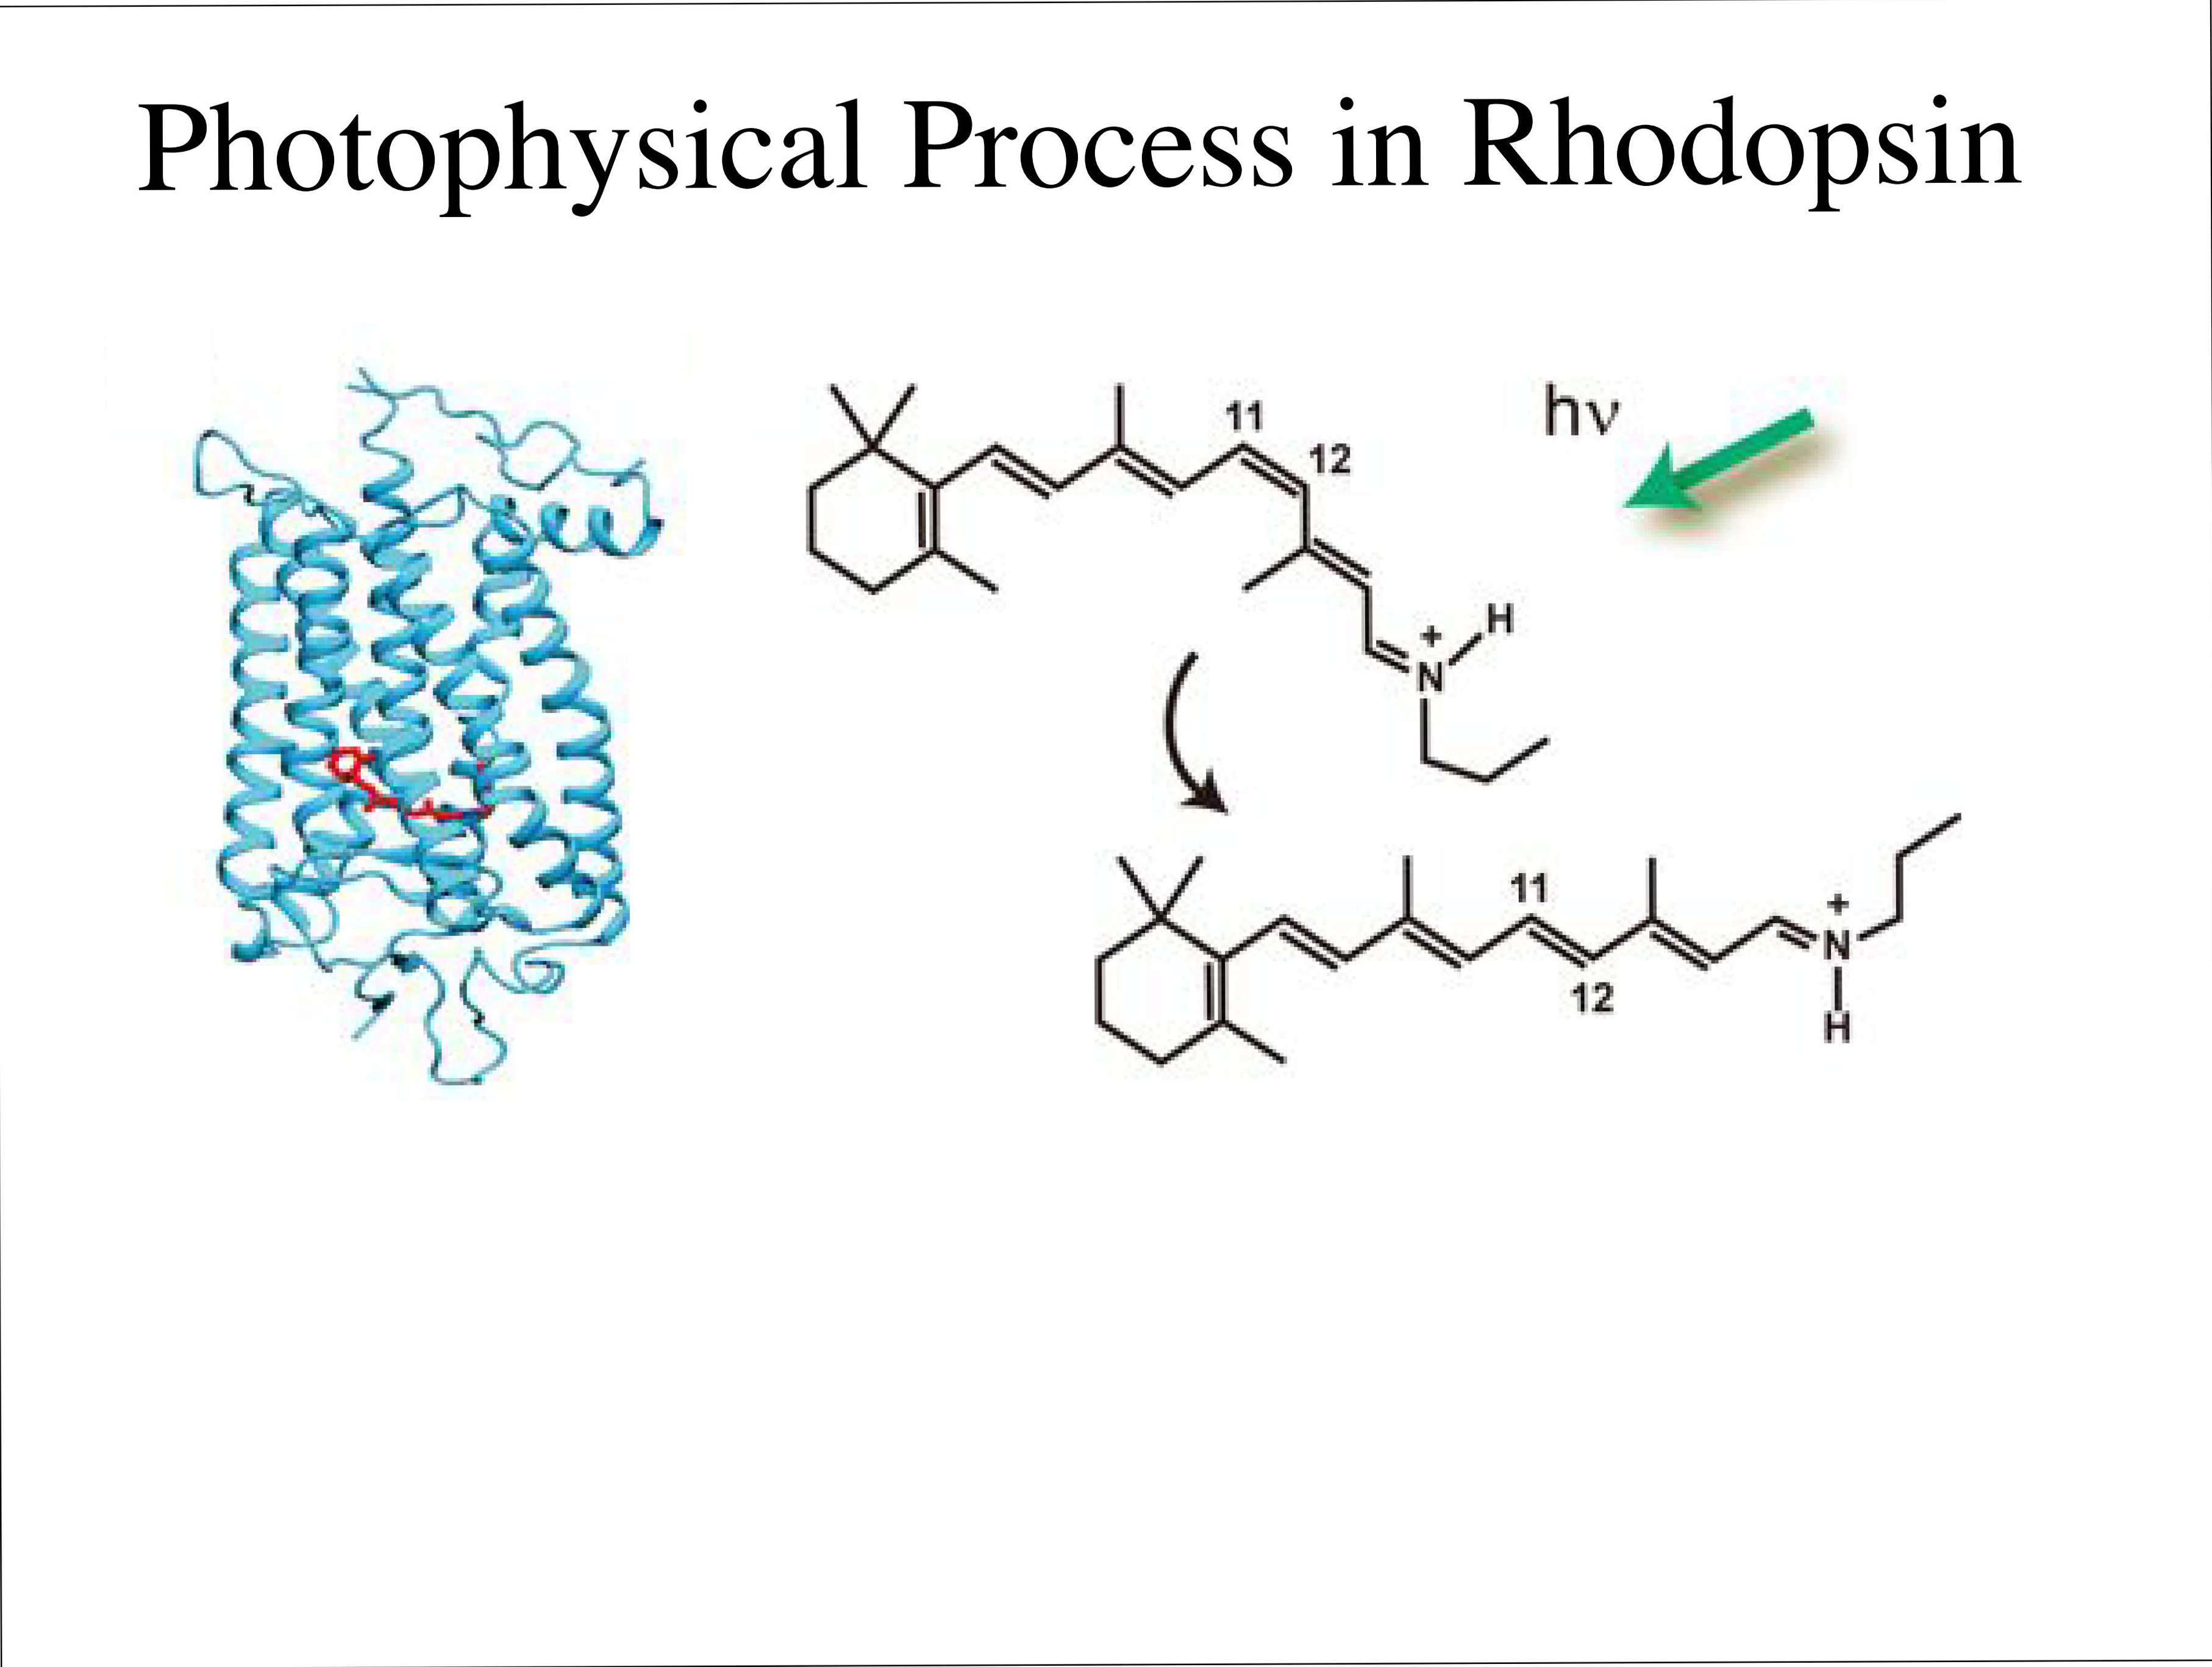 Photophysical Process in Rhodopsin